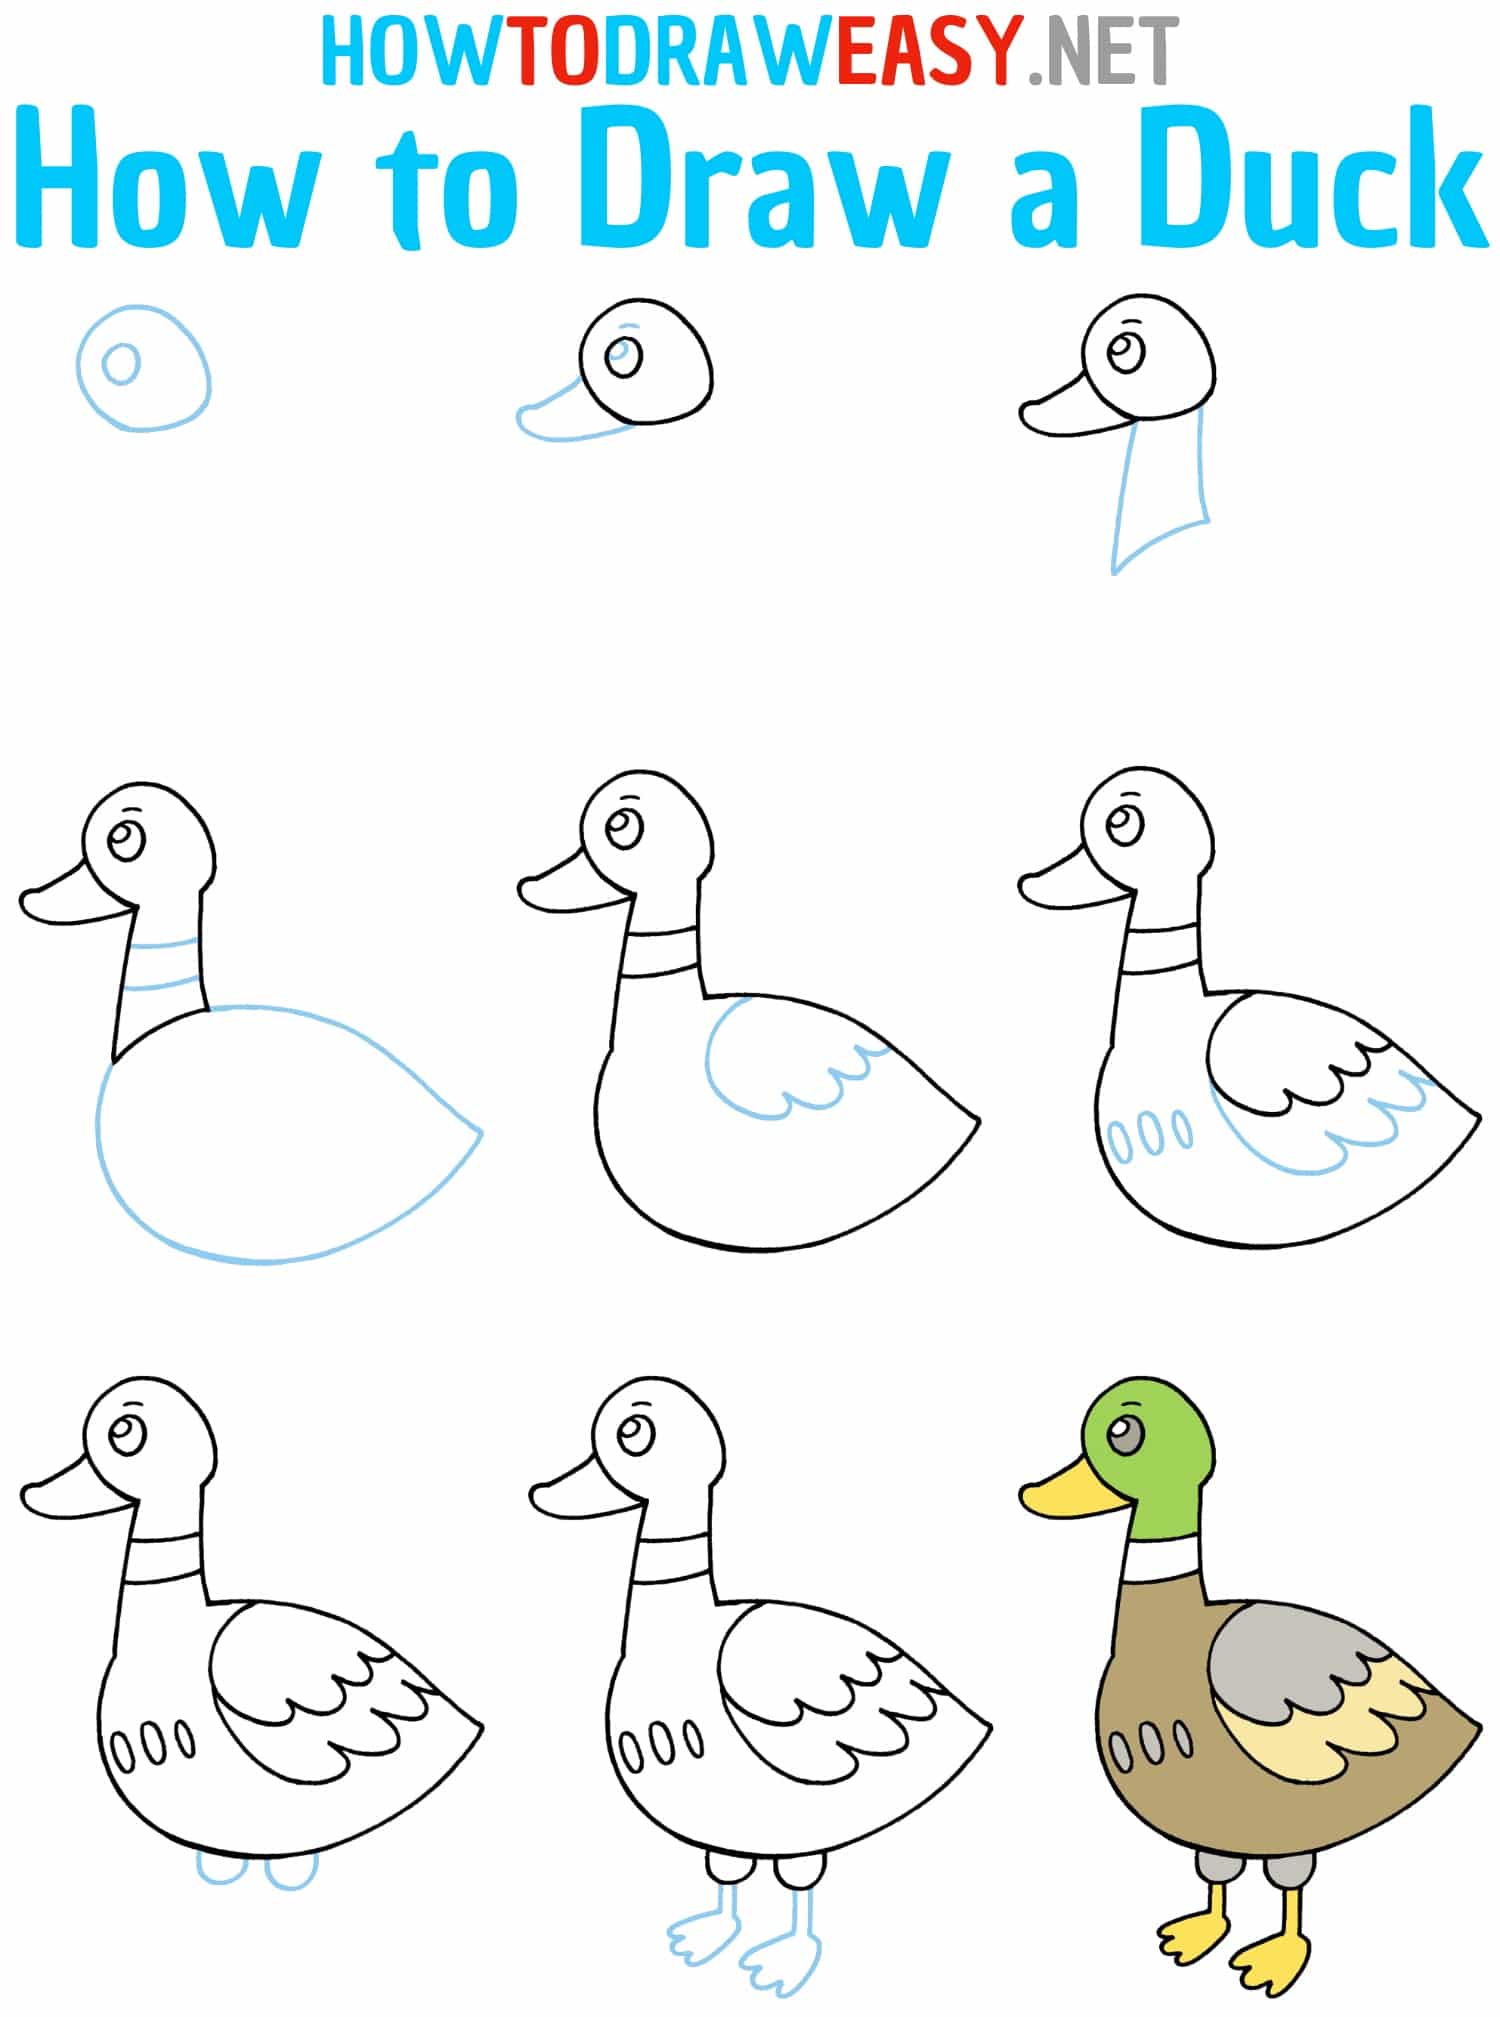 How to Draw a Duck Step by Step